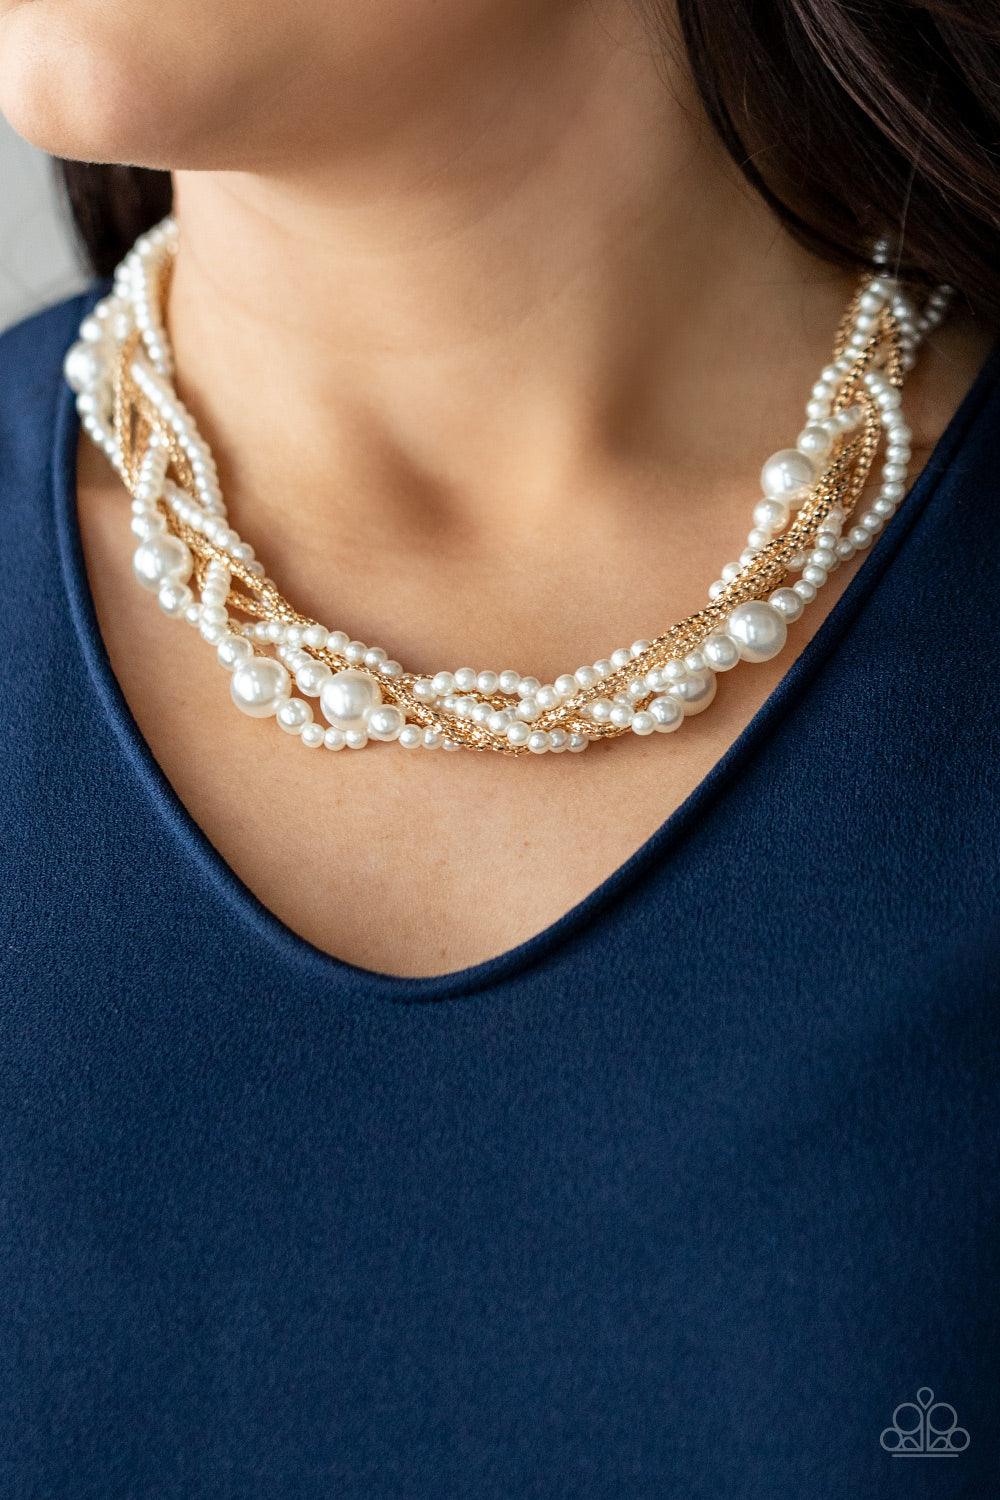 Paparazzi Accessories Royal Reminiscence - Gold Capped in gold fittings, strands of bubbly white pearls and dainty gold popcorn chains delicately weave below the collar, creating an elegantly effervescent centerpiece. Features an adjustable clasp closure.